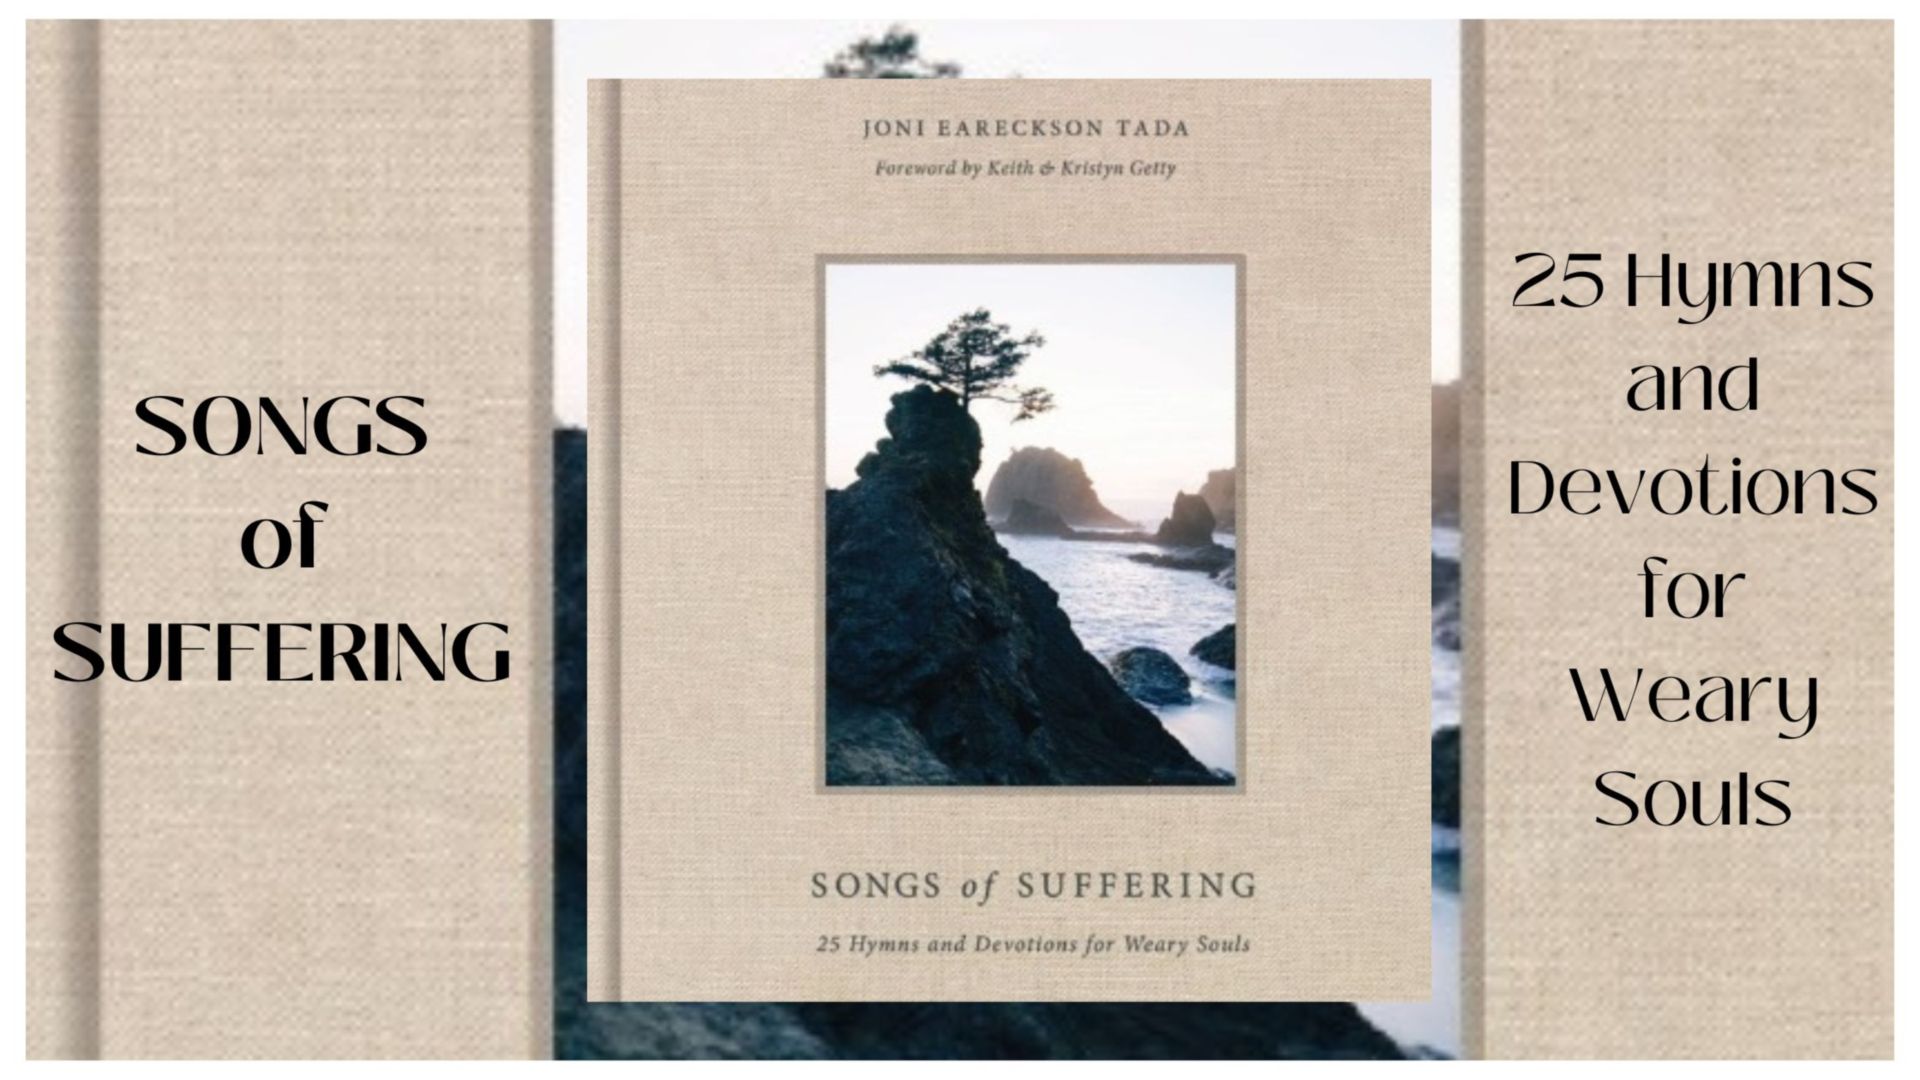 'Songs of Suffering', a new book from Joni Eareckson Tada